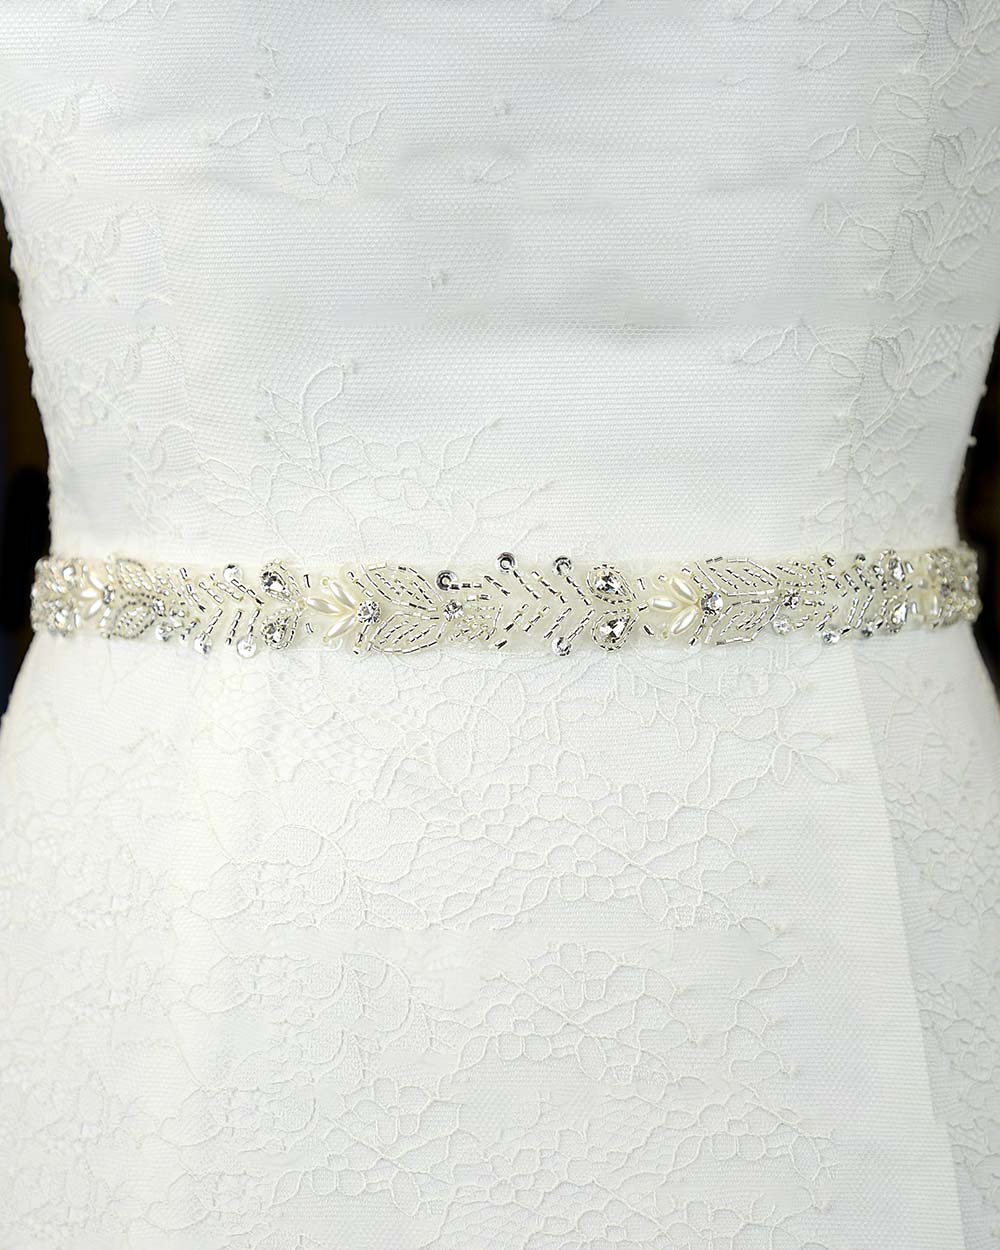 This beautiful wedding belt has a stunning leaf beaded design. With pearls and diamantes adding extra glamour to any wedding dress. Displayed on an 81" ivory organza ribbon, simply tie around your waist.